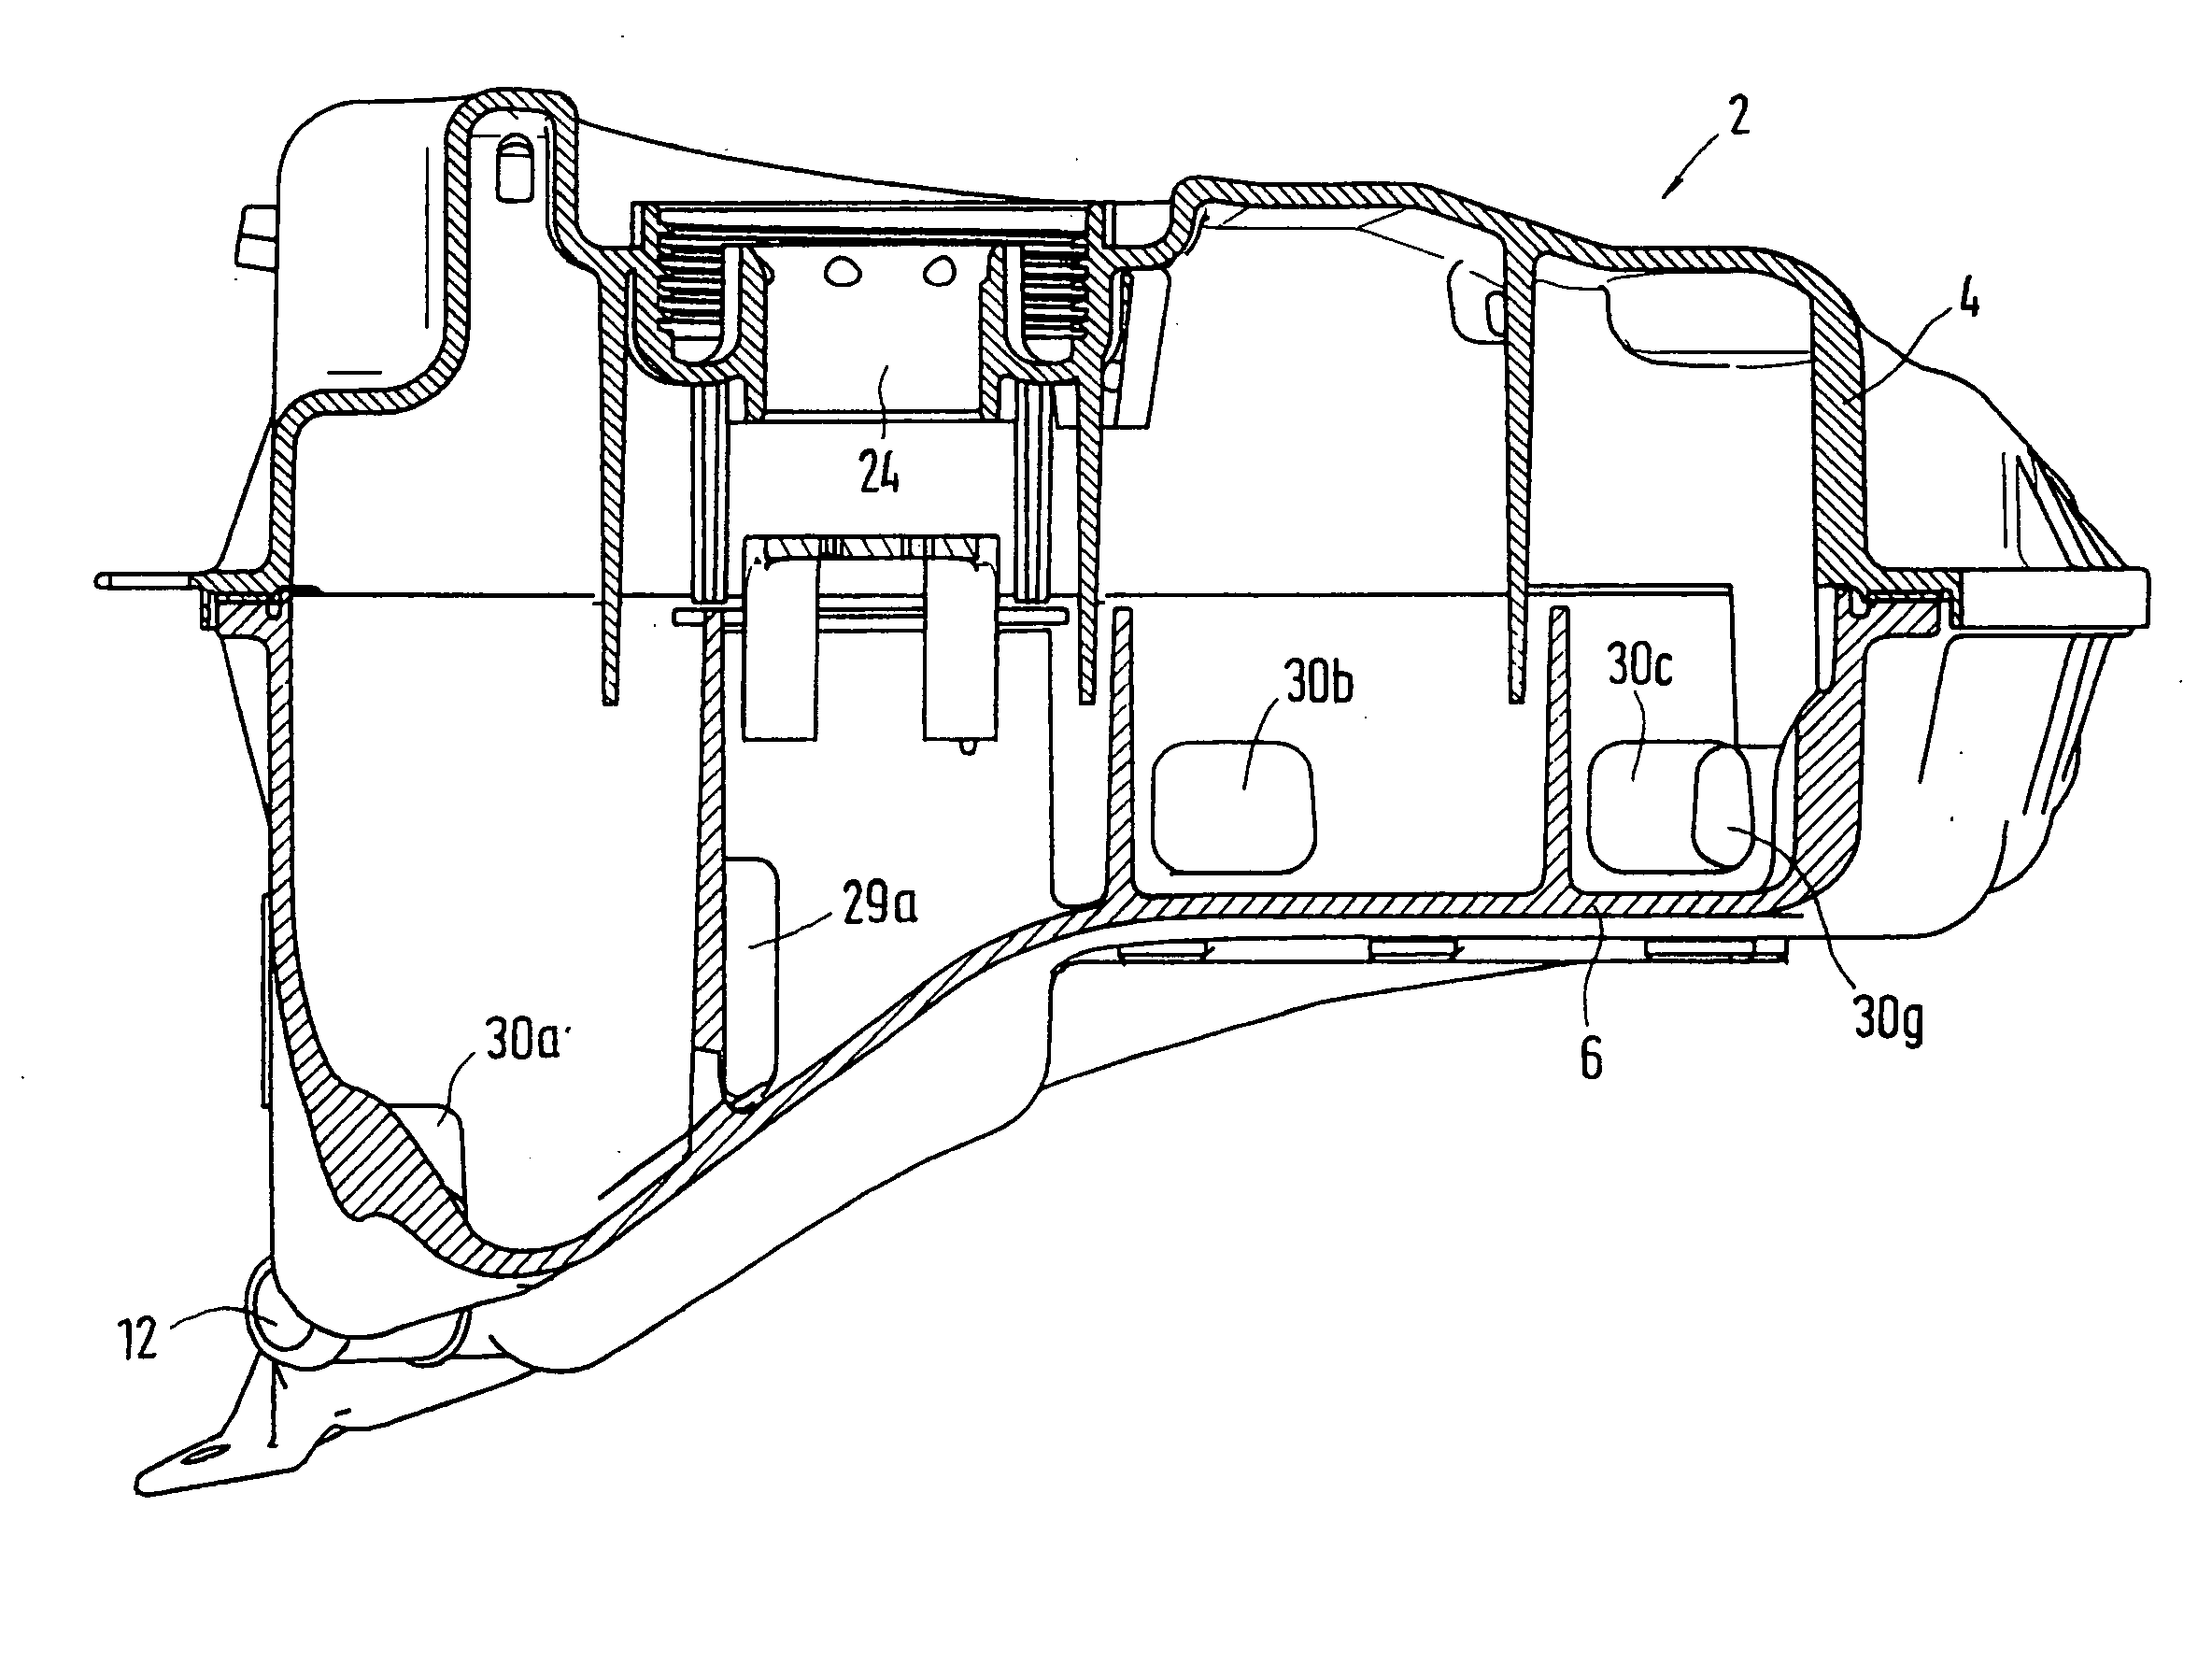 Compensation reservoir for a cooling circuit of an internal combustion engine